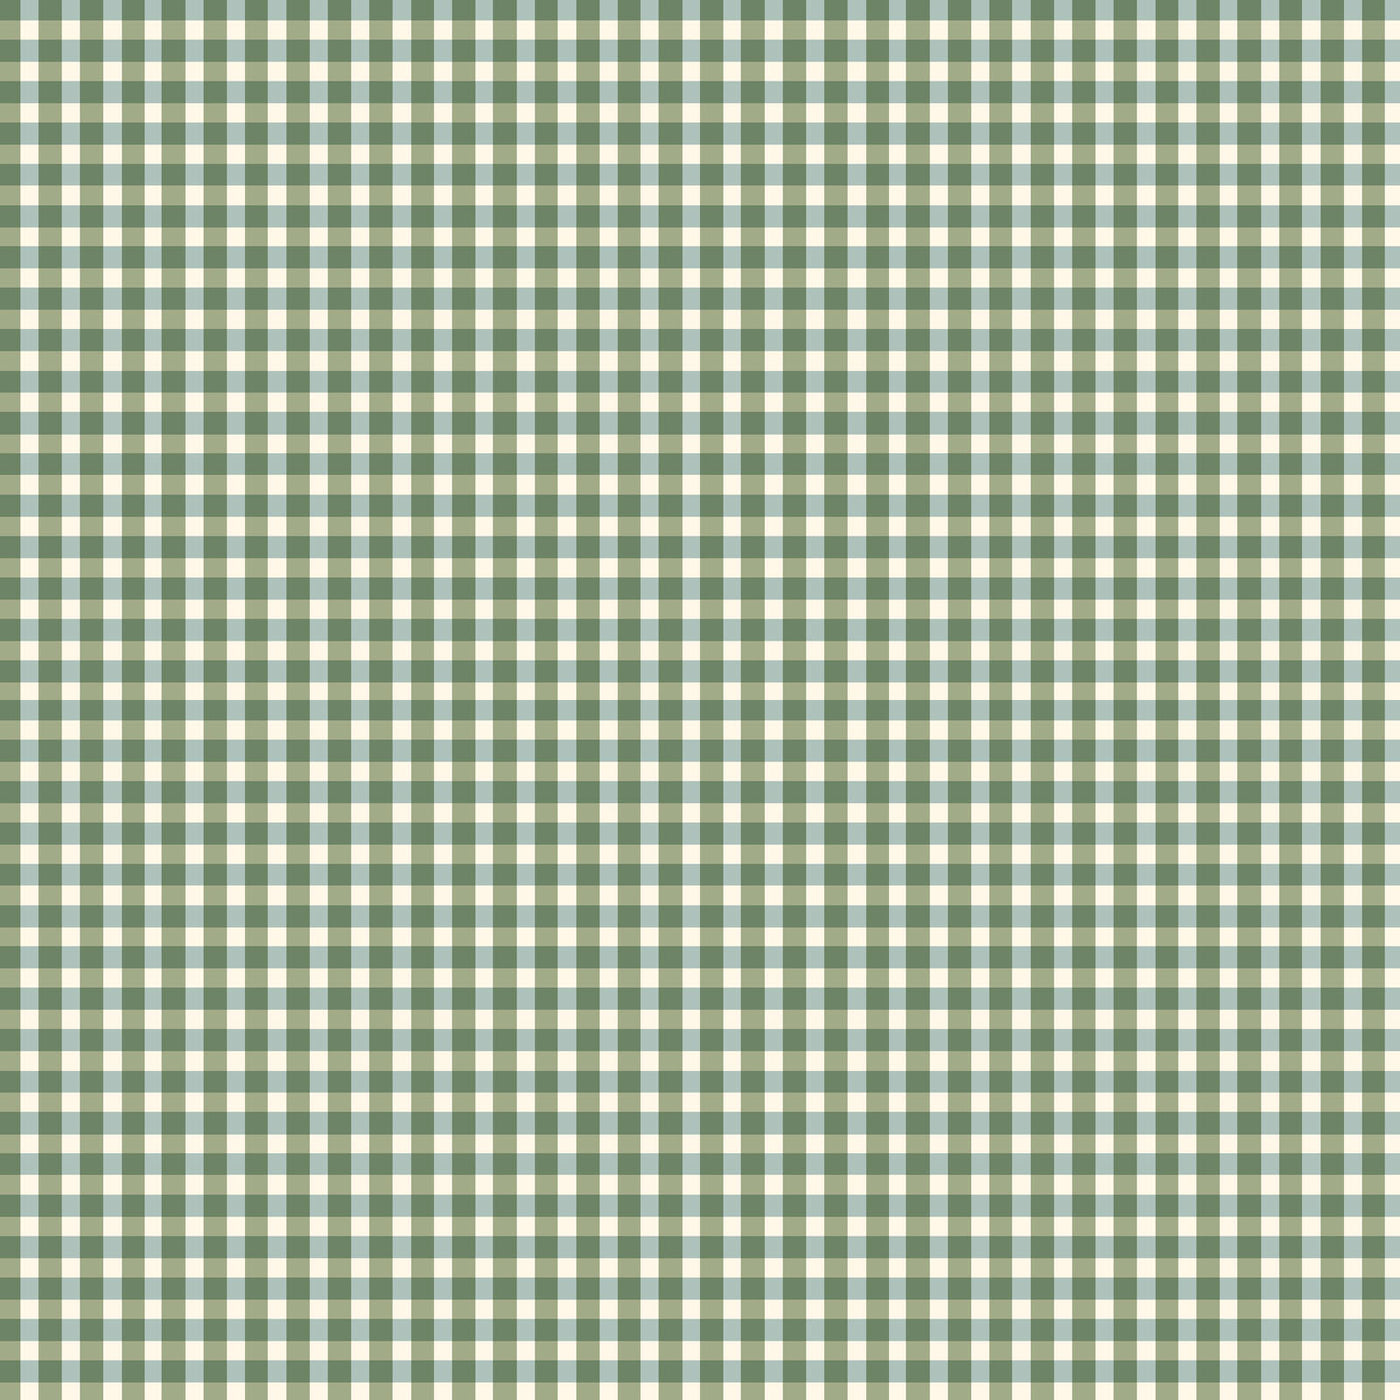 Lovely Bunch Gingham Plaid Green